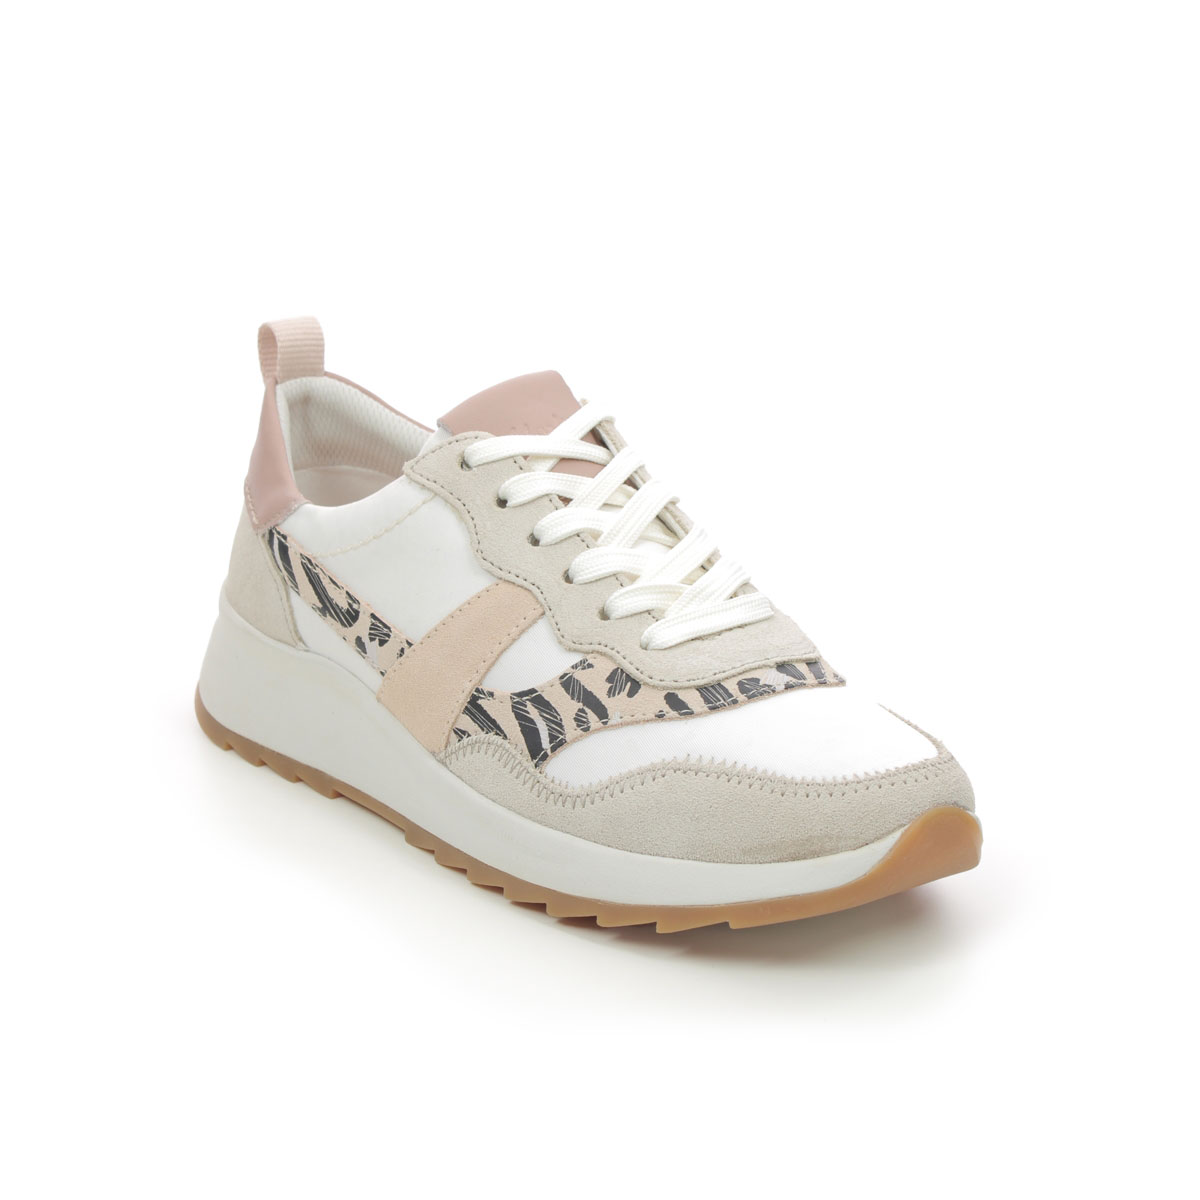 Clarks Dashlite Jazz White Pink Womens Trainers 704294D In Size 7.5 In Plain White Pink